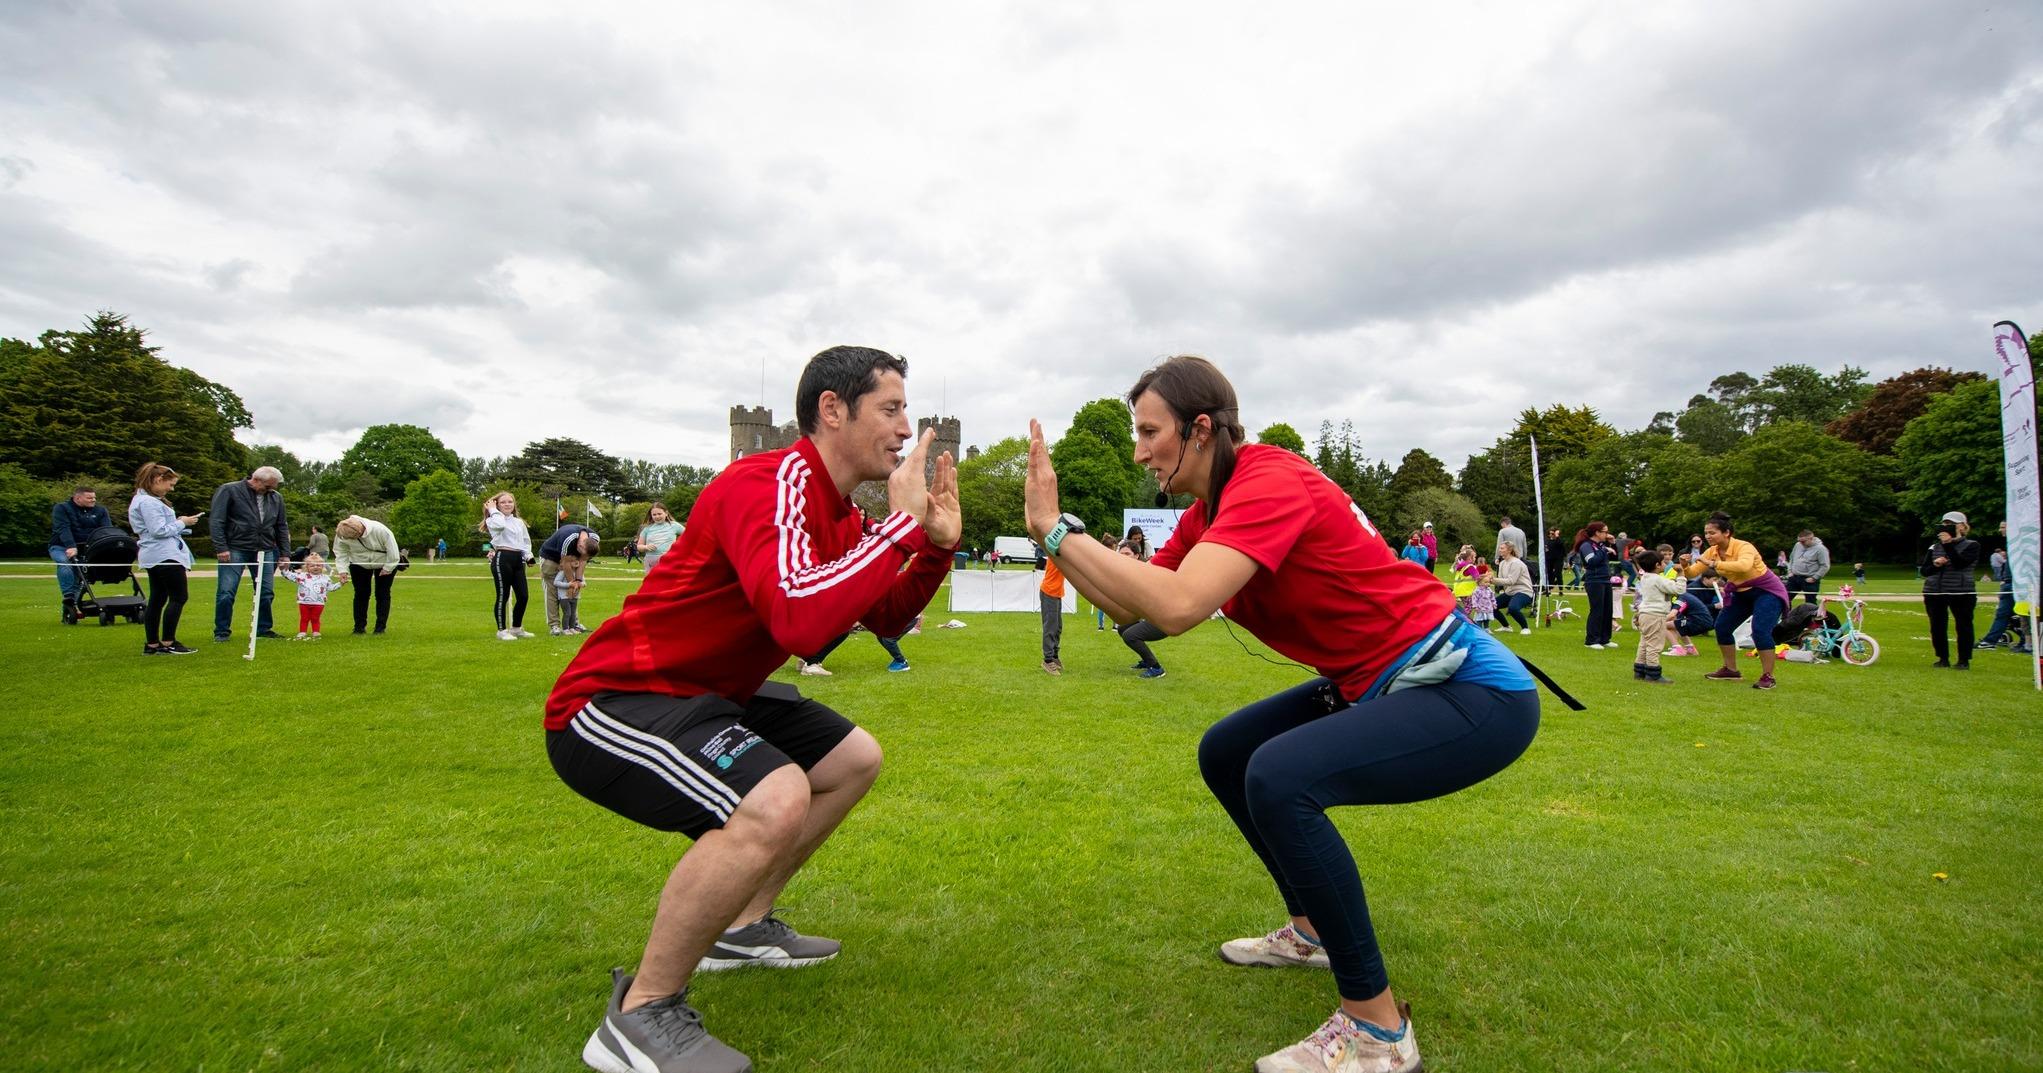 sports development officer owen mcgrath and an instructor at a family fun day out